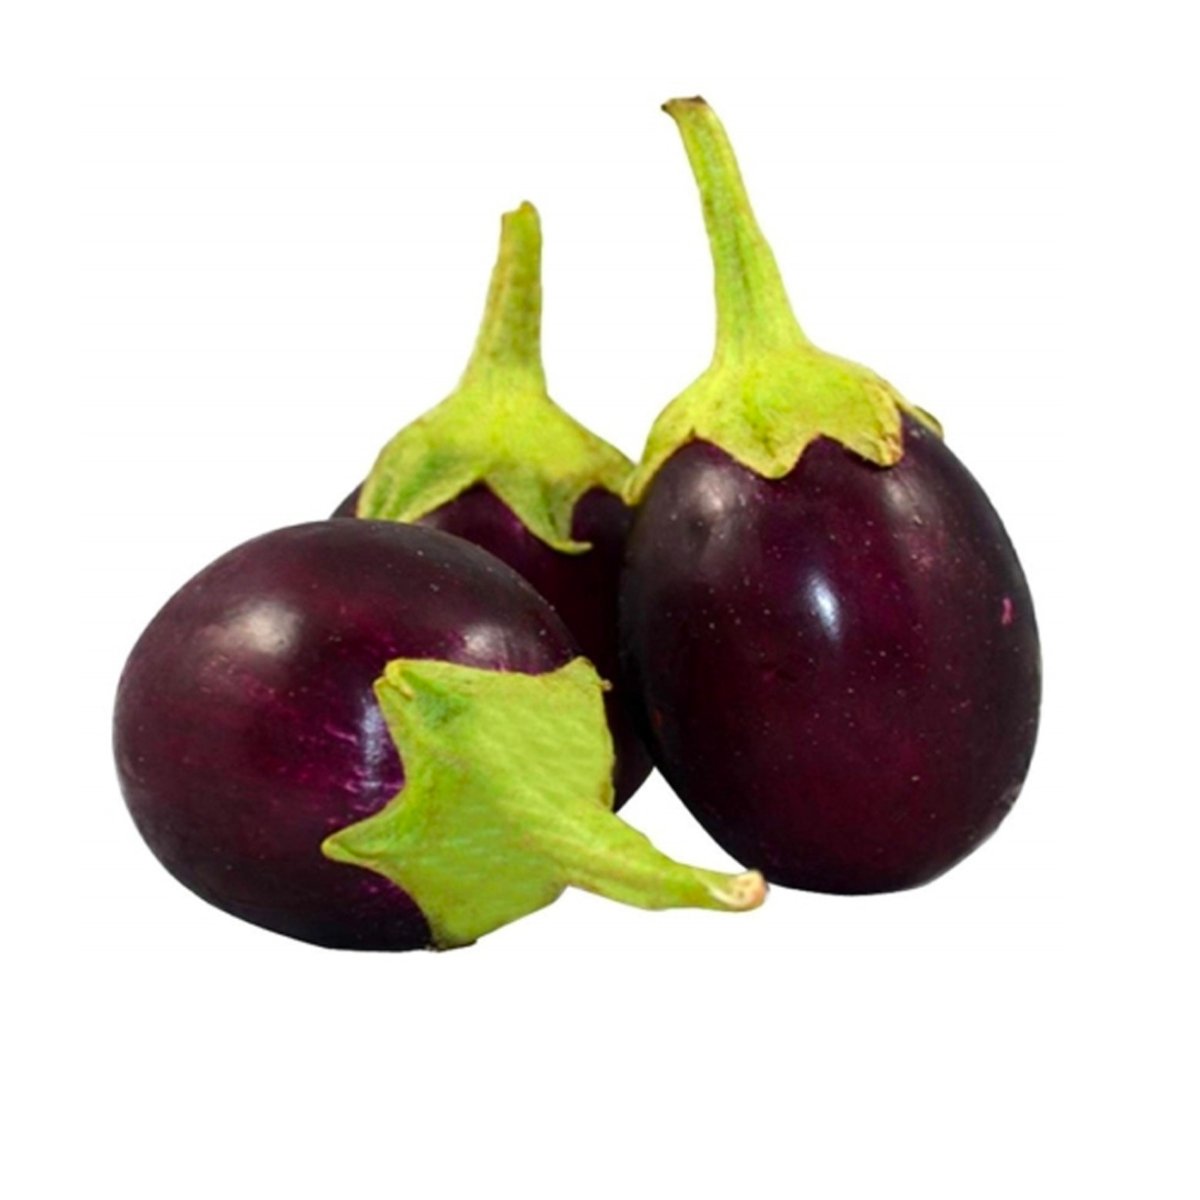 Round Brinjal Small 500g Approx Weight